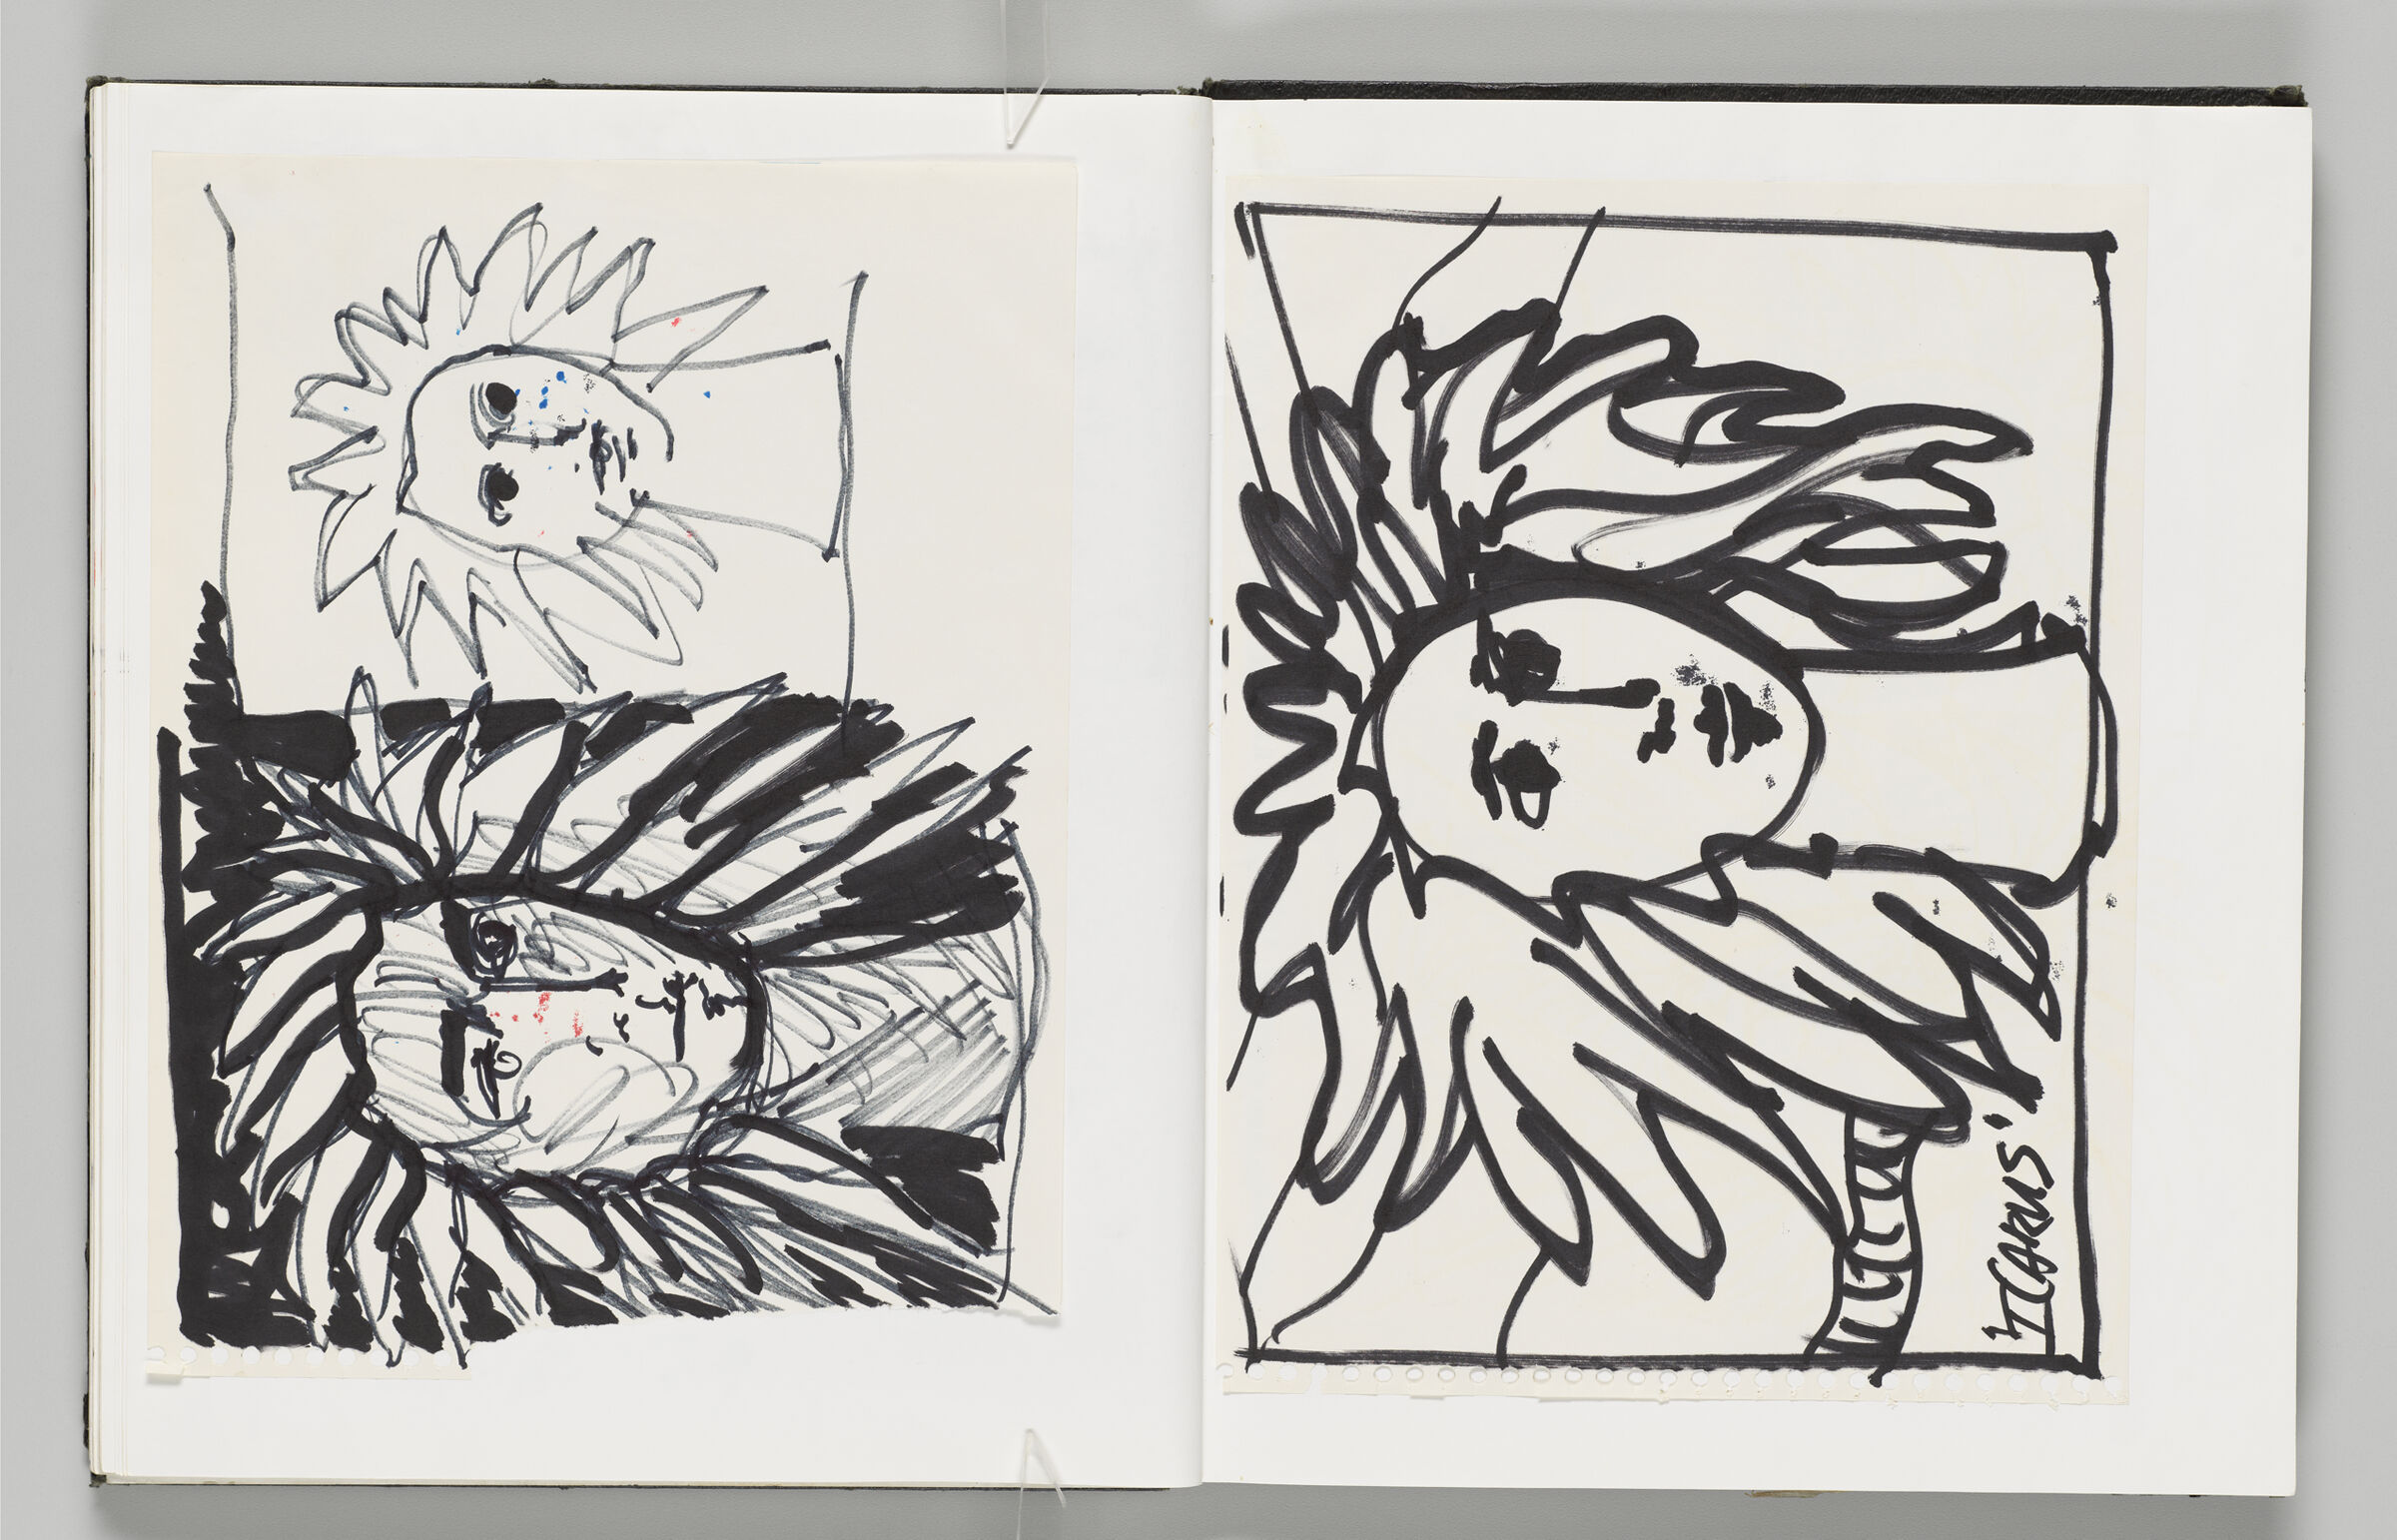 Untitled (Adhered Icarus Sketches, Left Page); Untitled (Adhered Icarus Sketch, Right Page)